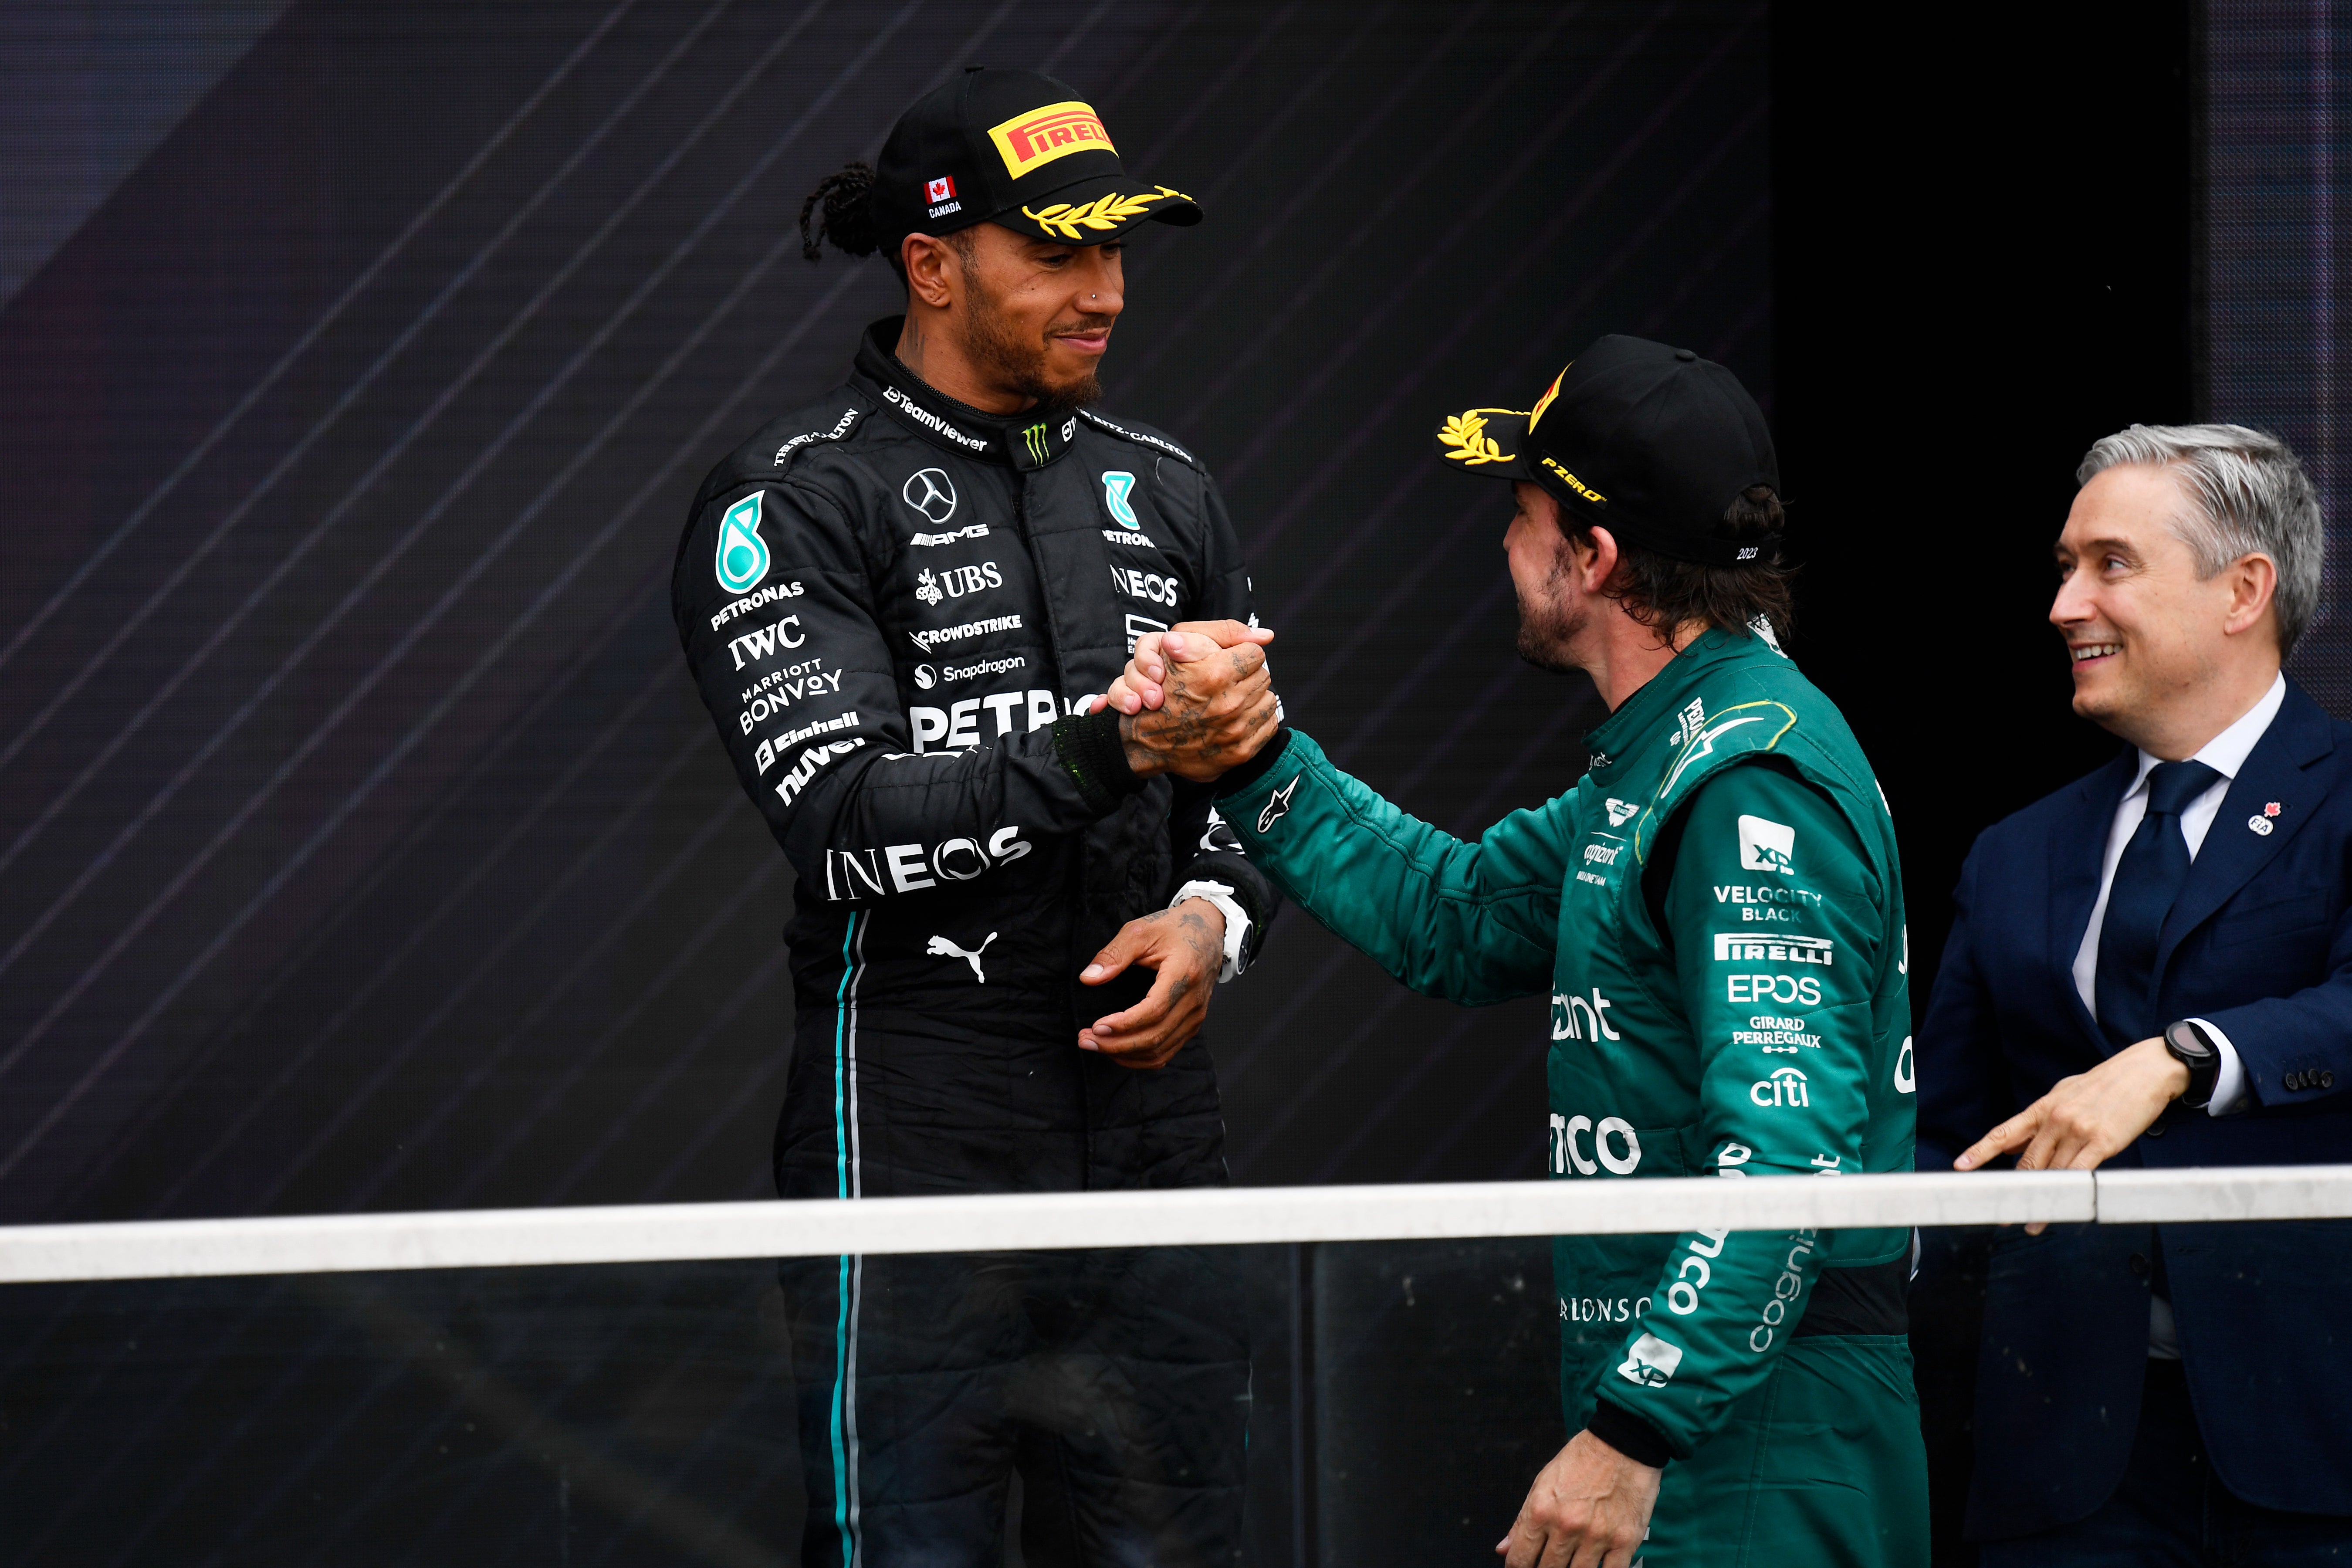 Fernando Alonso praised Lewis Hamilton’s level after he signed a new contract with Mercedes